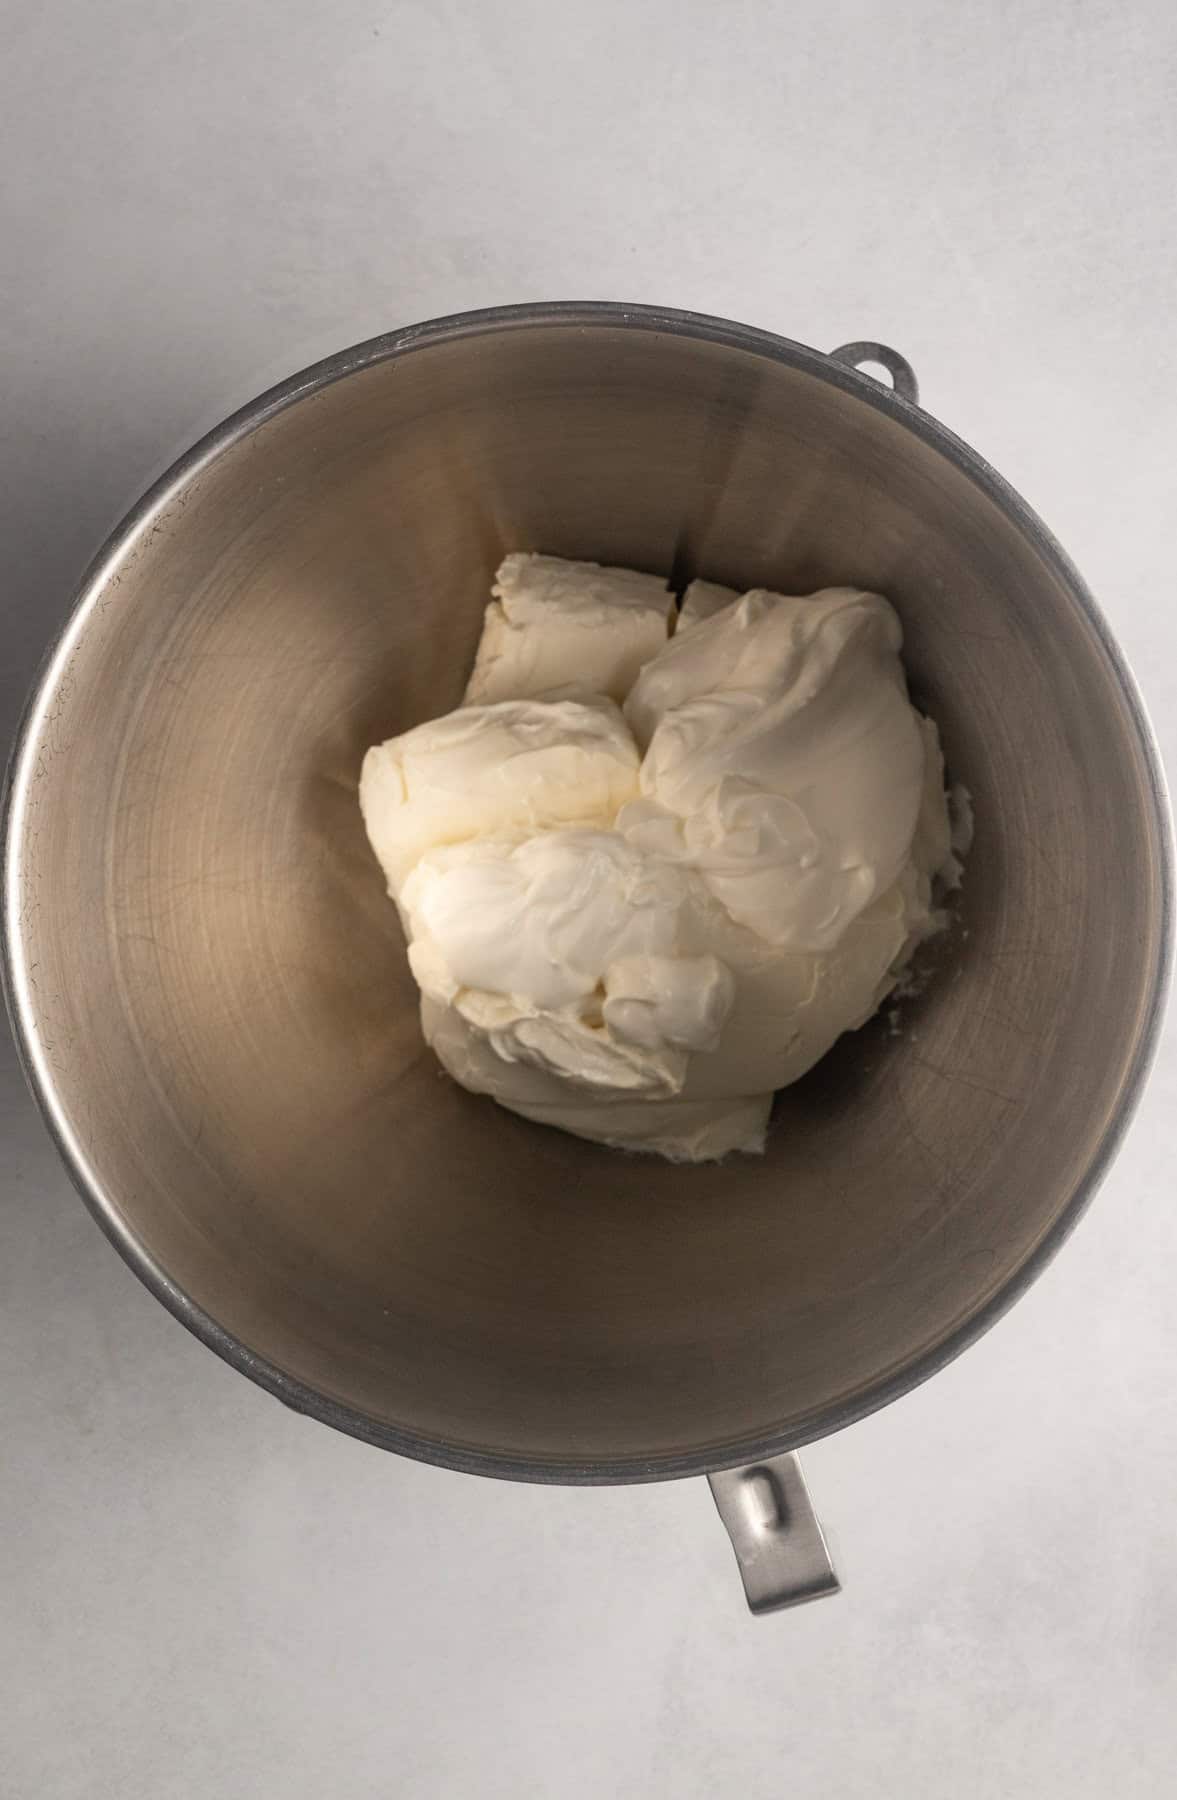 Image shows ingredients for gluten free pumpkin cheesecake filling being added to the mixture. So far, the cream cheese and sour cream have been added.